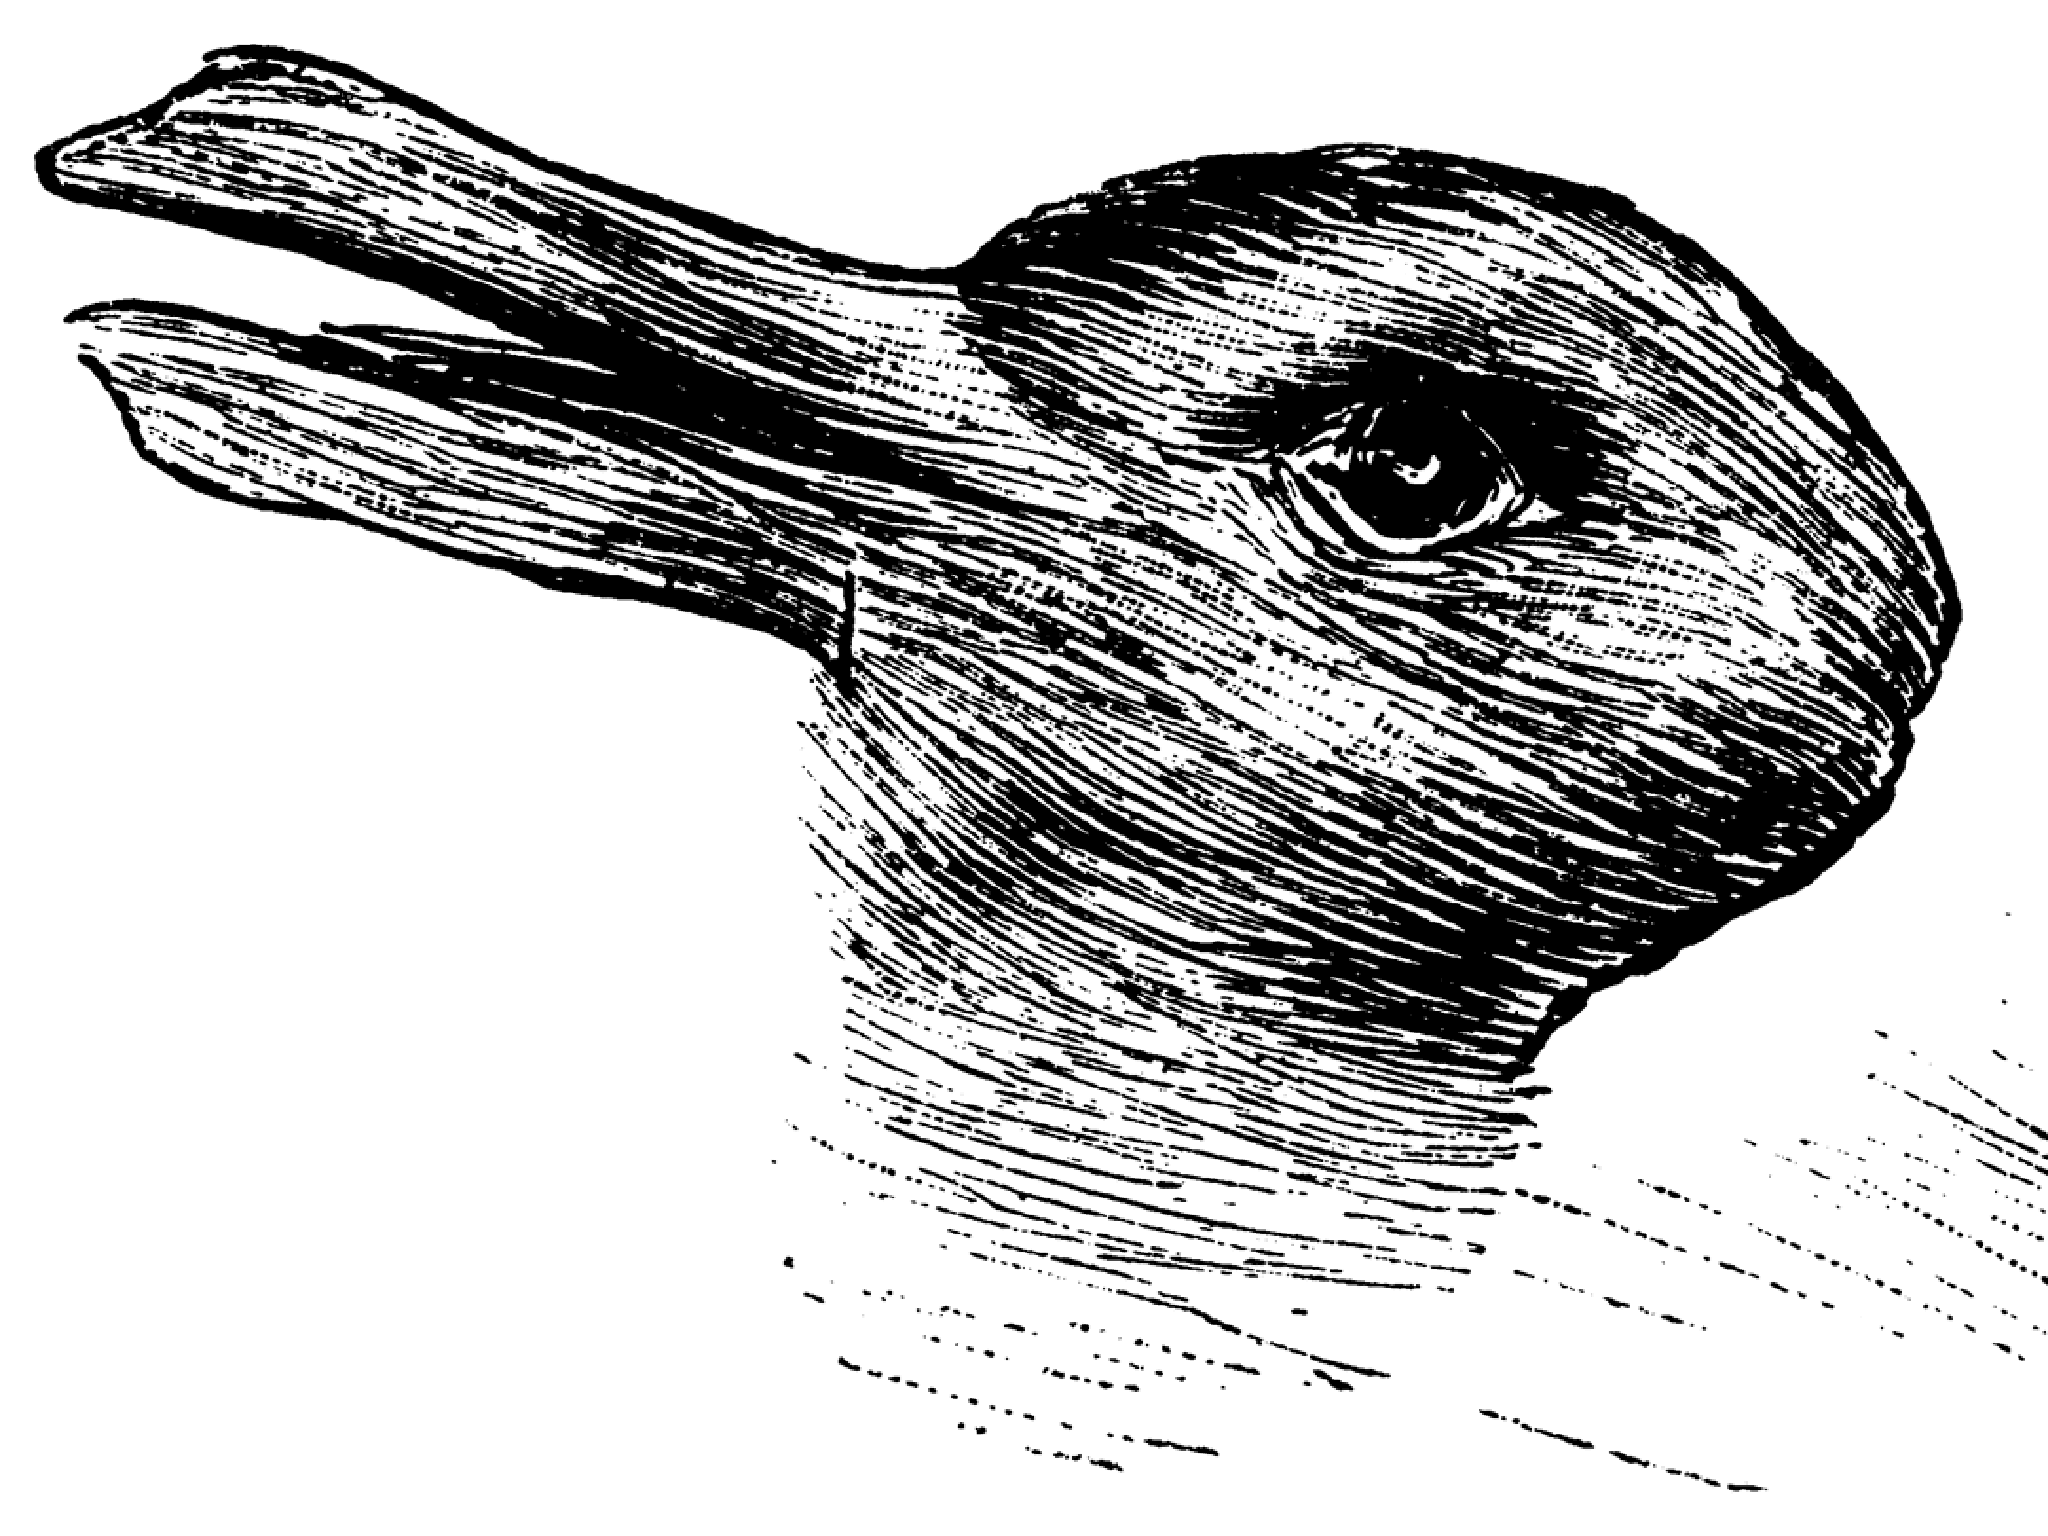 Duck or rabbit? 100-year-old optical illusion could tell you how creative you are | The Independent